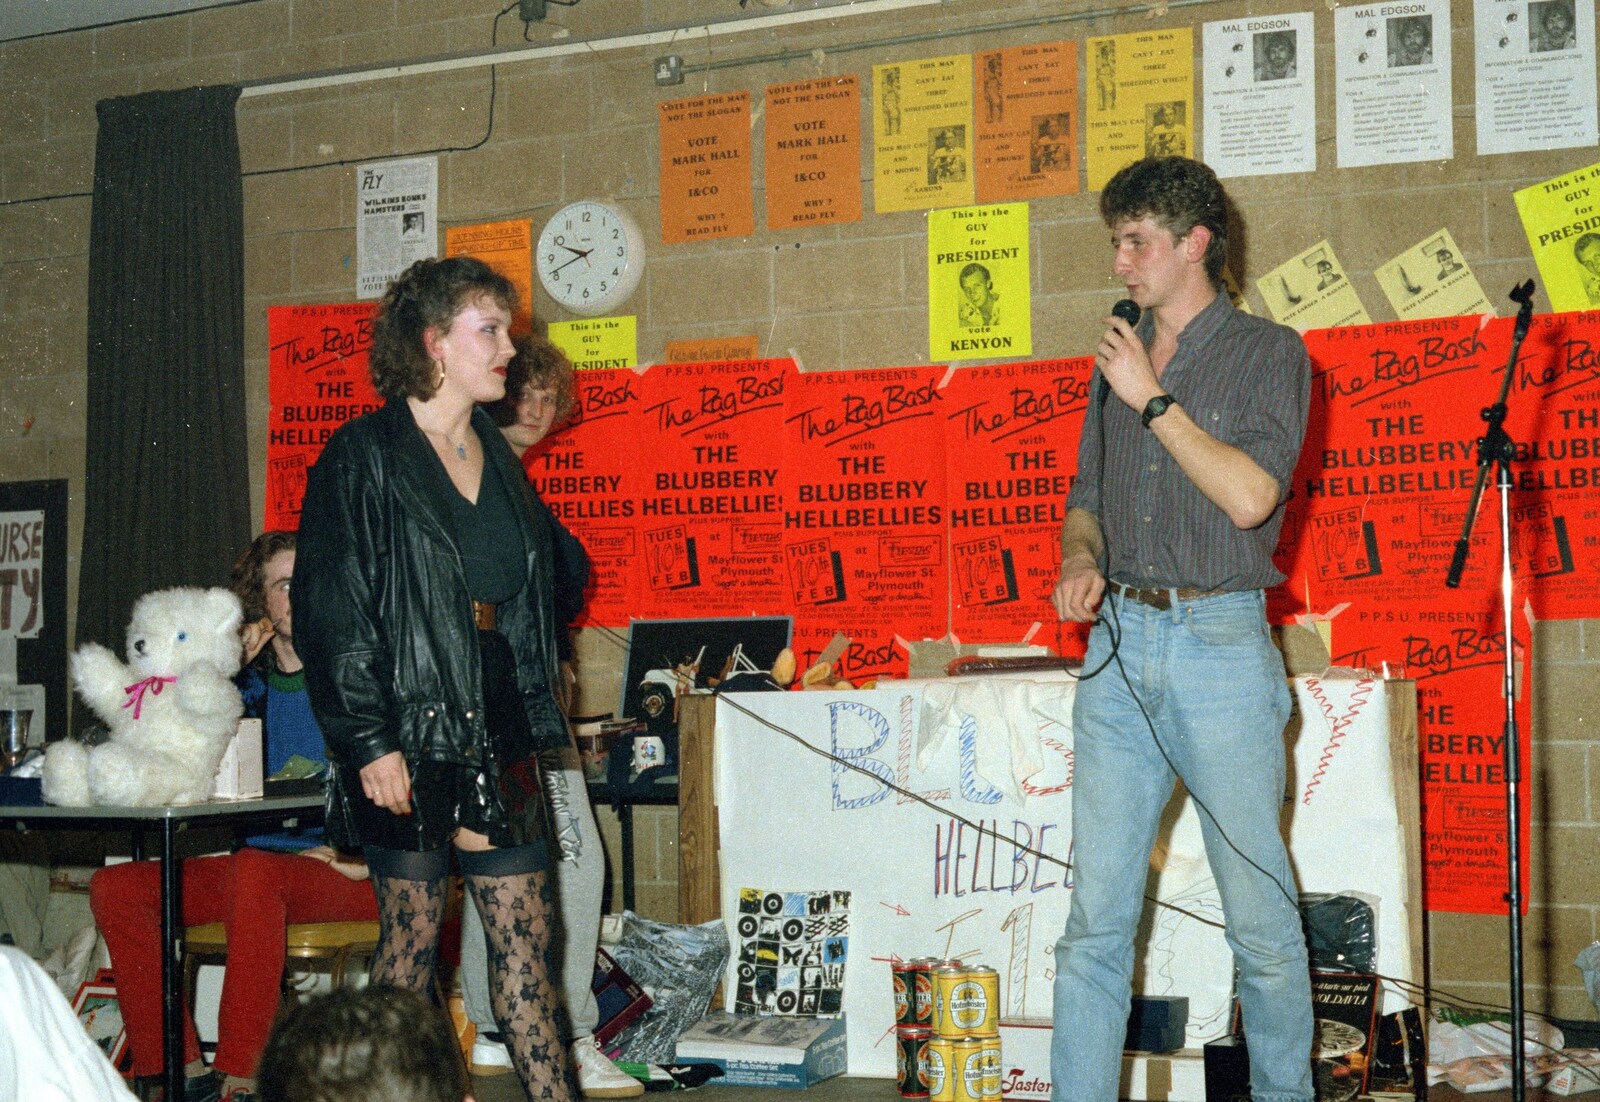 Fishnet stockings from Uni: Pirate RAG Bash, Games Nights and Brian's Beard, PPSU, Plymouth - 10th February 1987